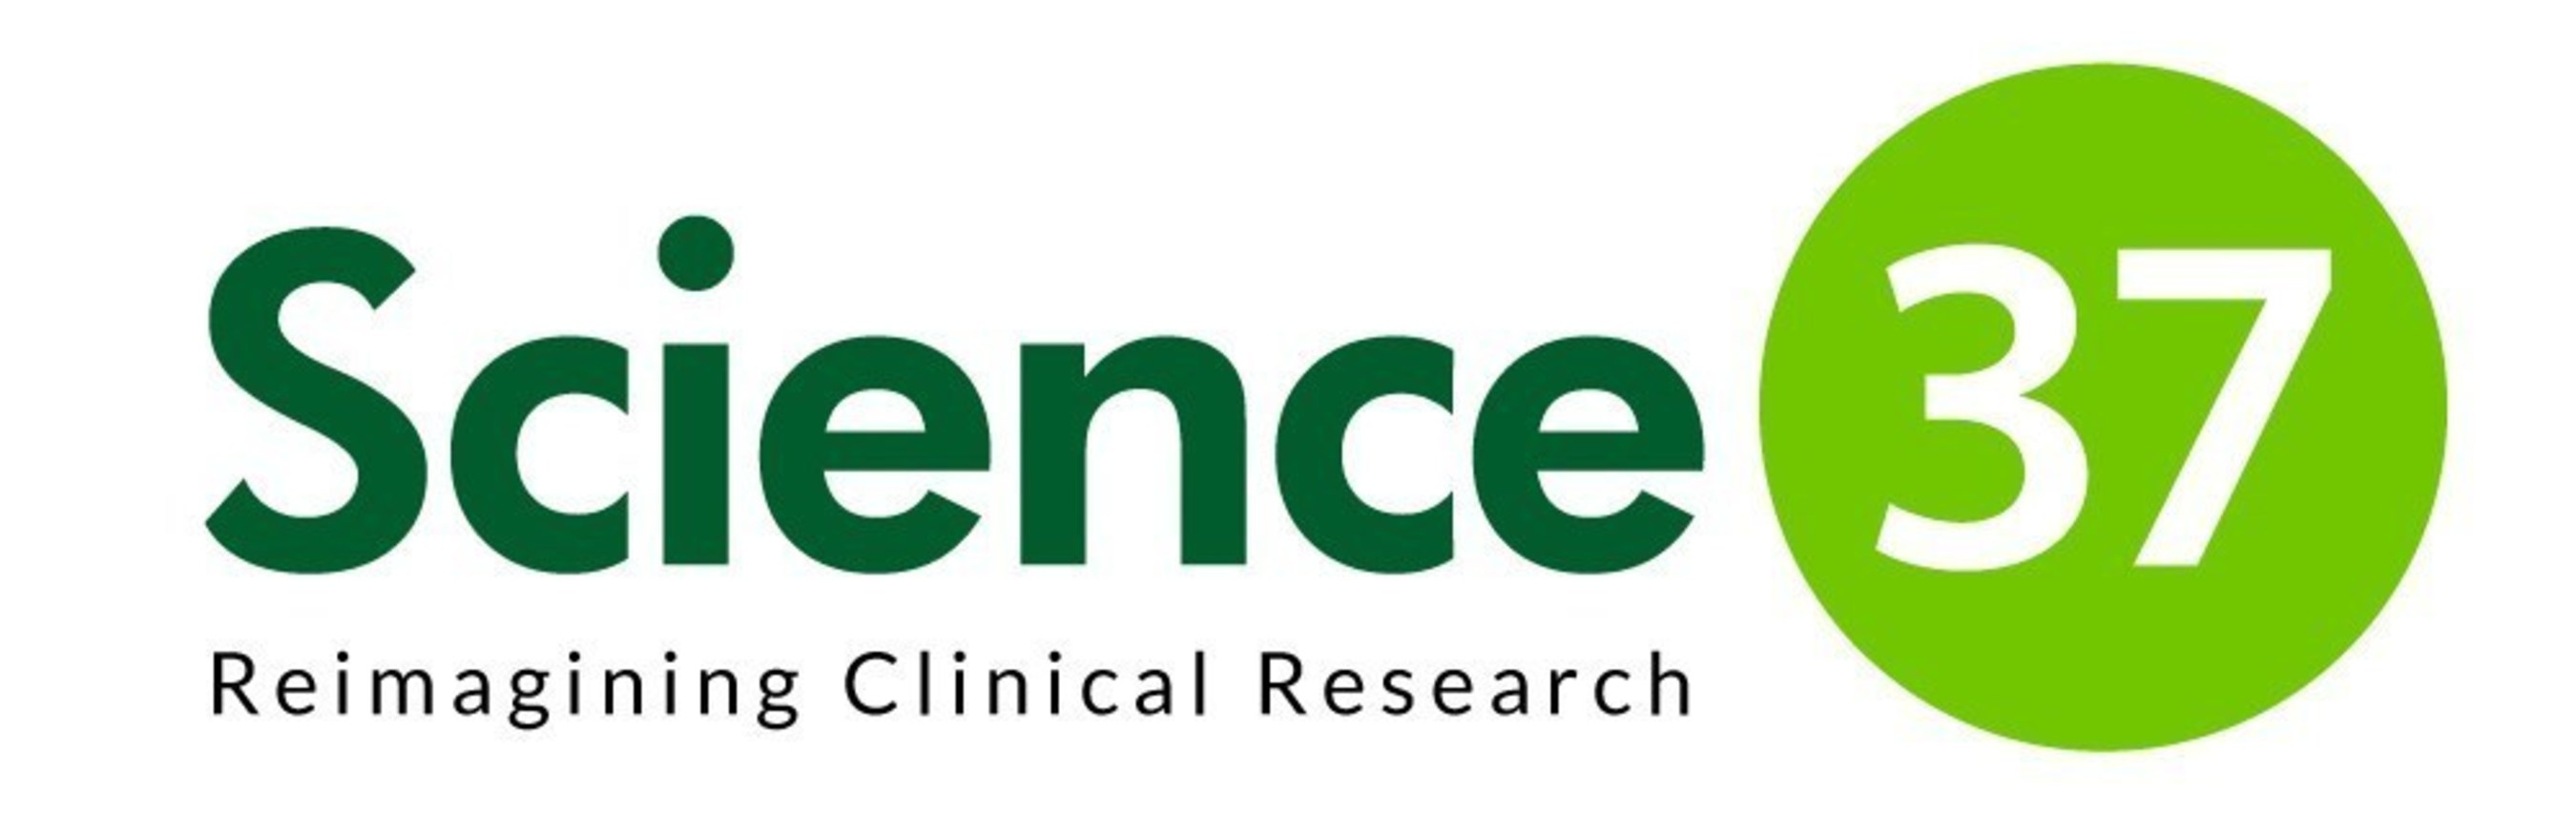 Science 37 Secures $6.5M Series A Funding To Accelerate Clinical Trial Research